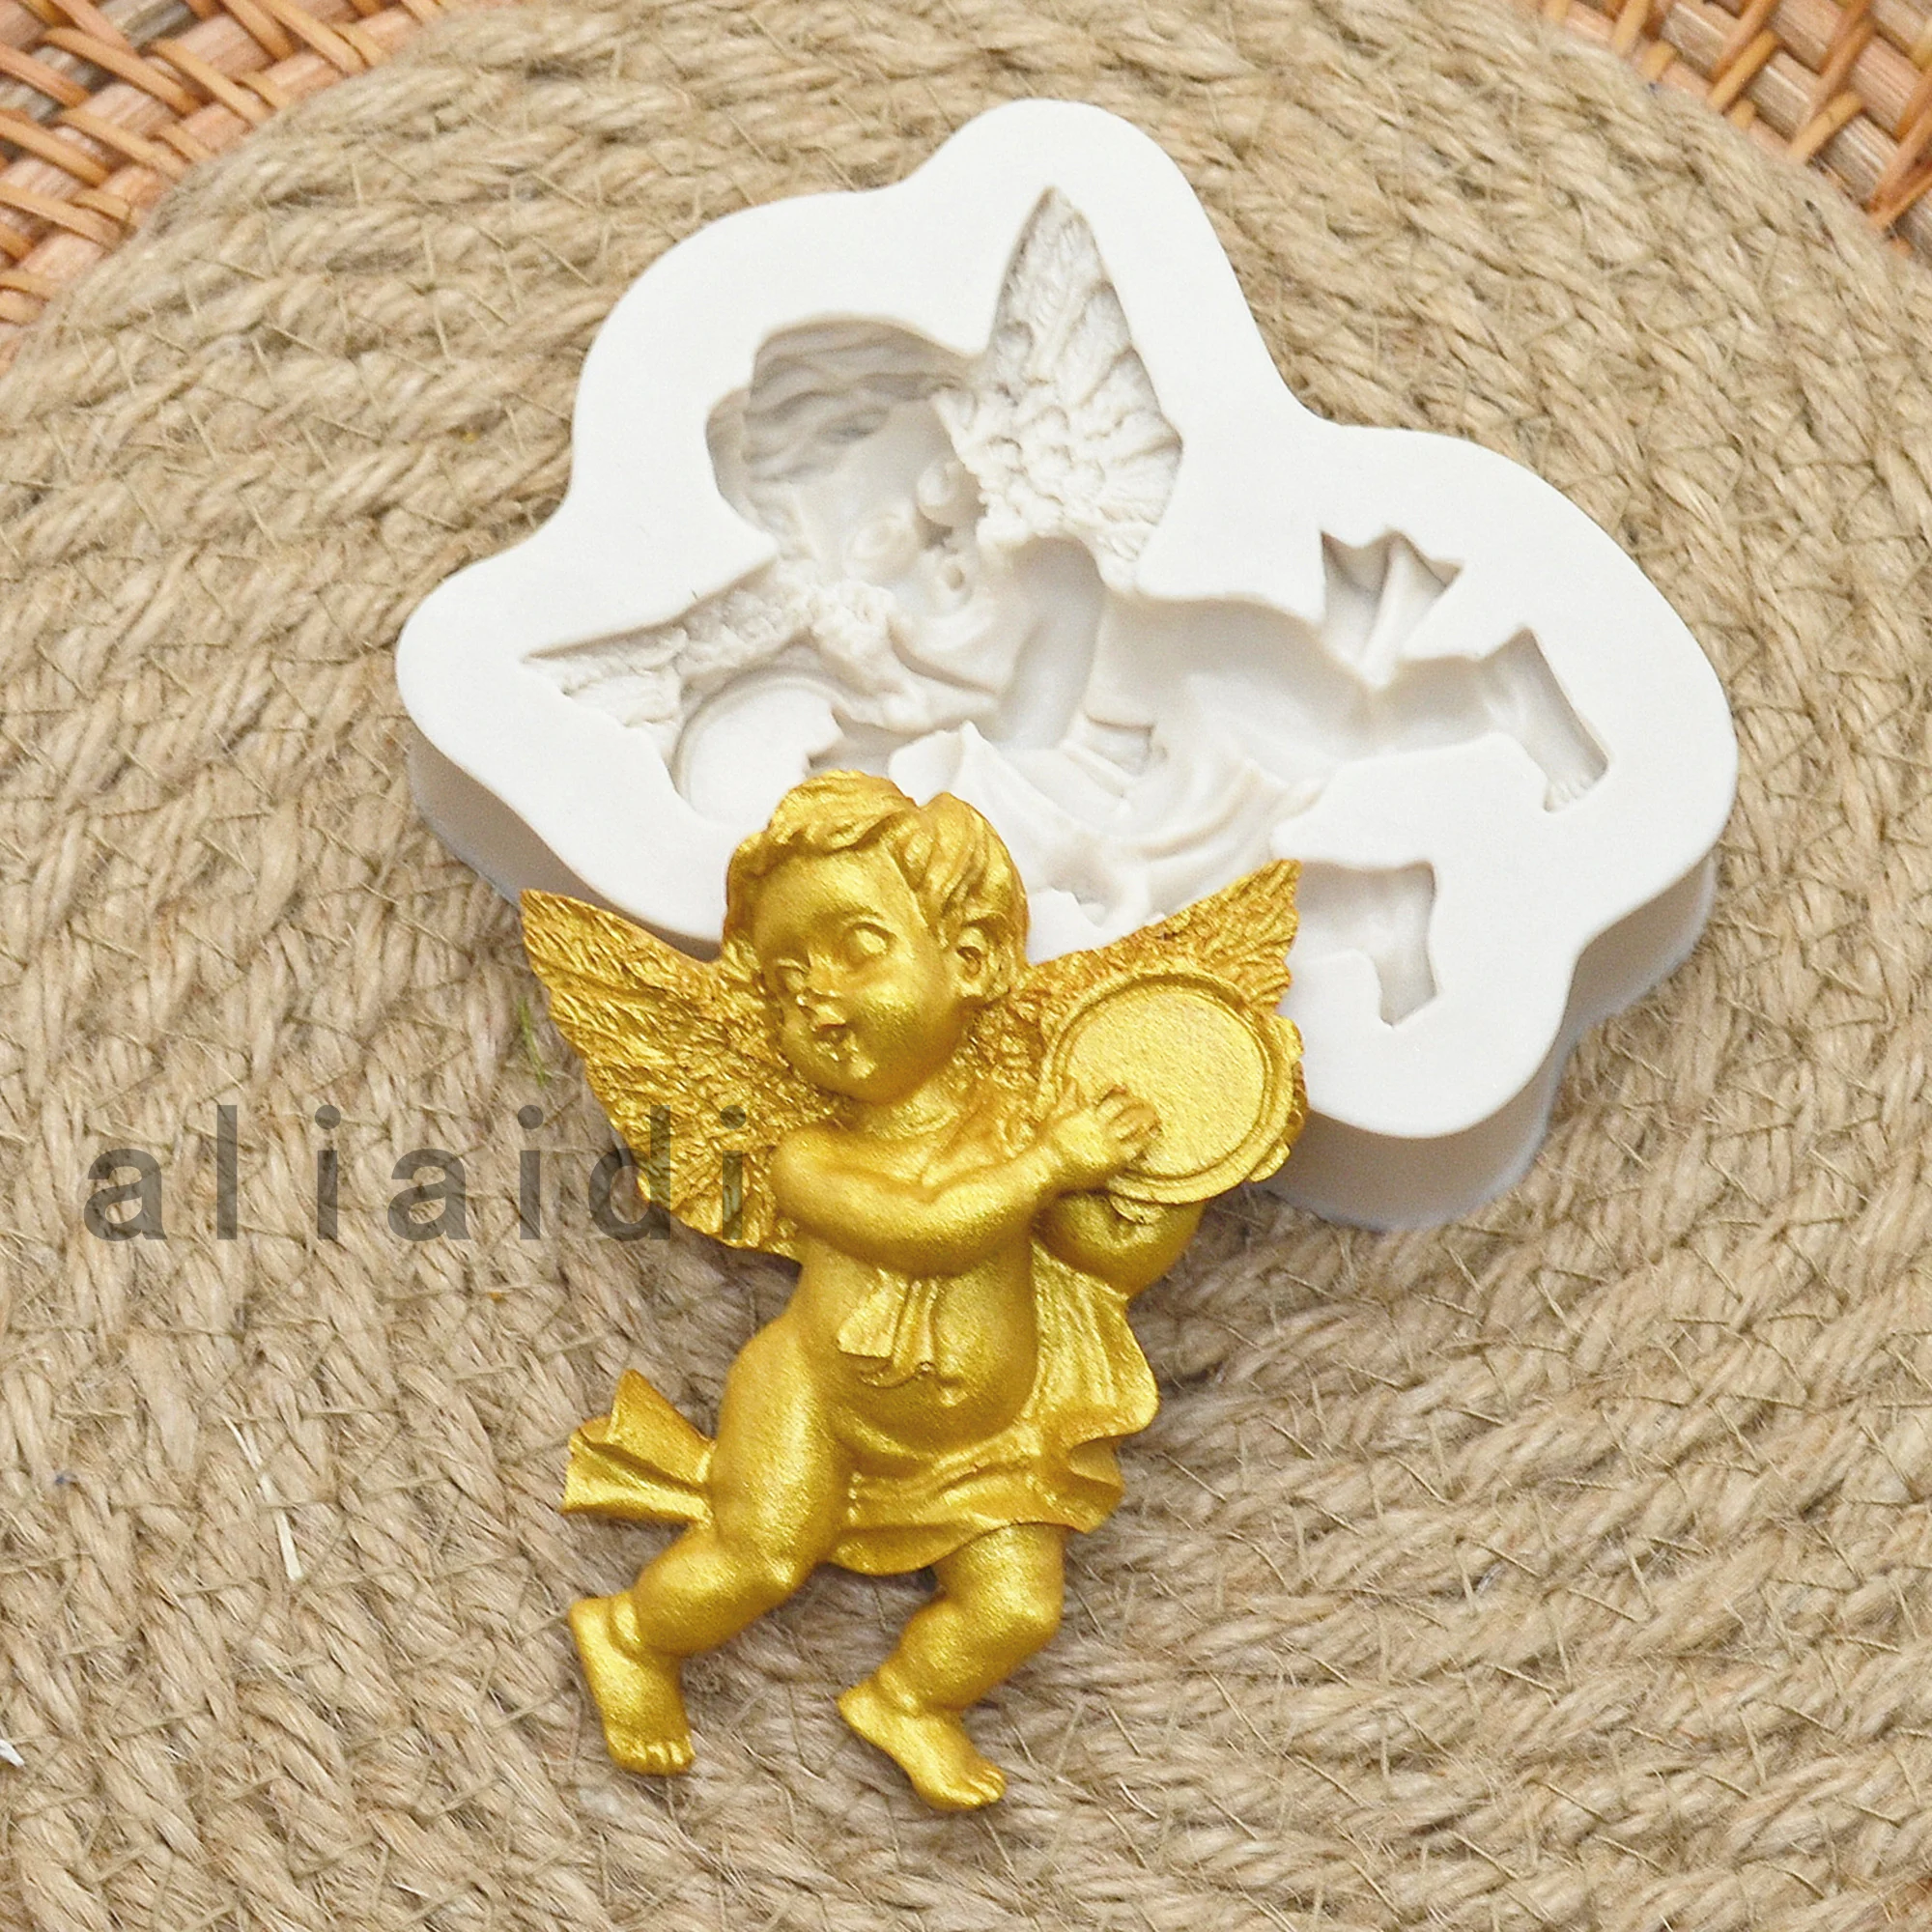 

Angel Baby Silicone Mold Cupcake Top Decorating Fudge Baby Birthday Cake Decoration Tool Biscuit Baking Chocolate Candy Mold 130